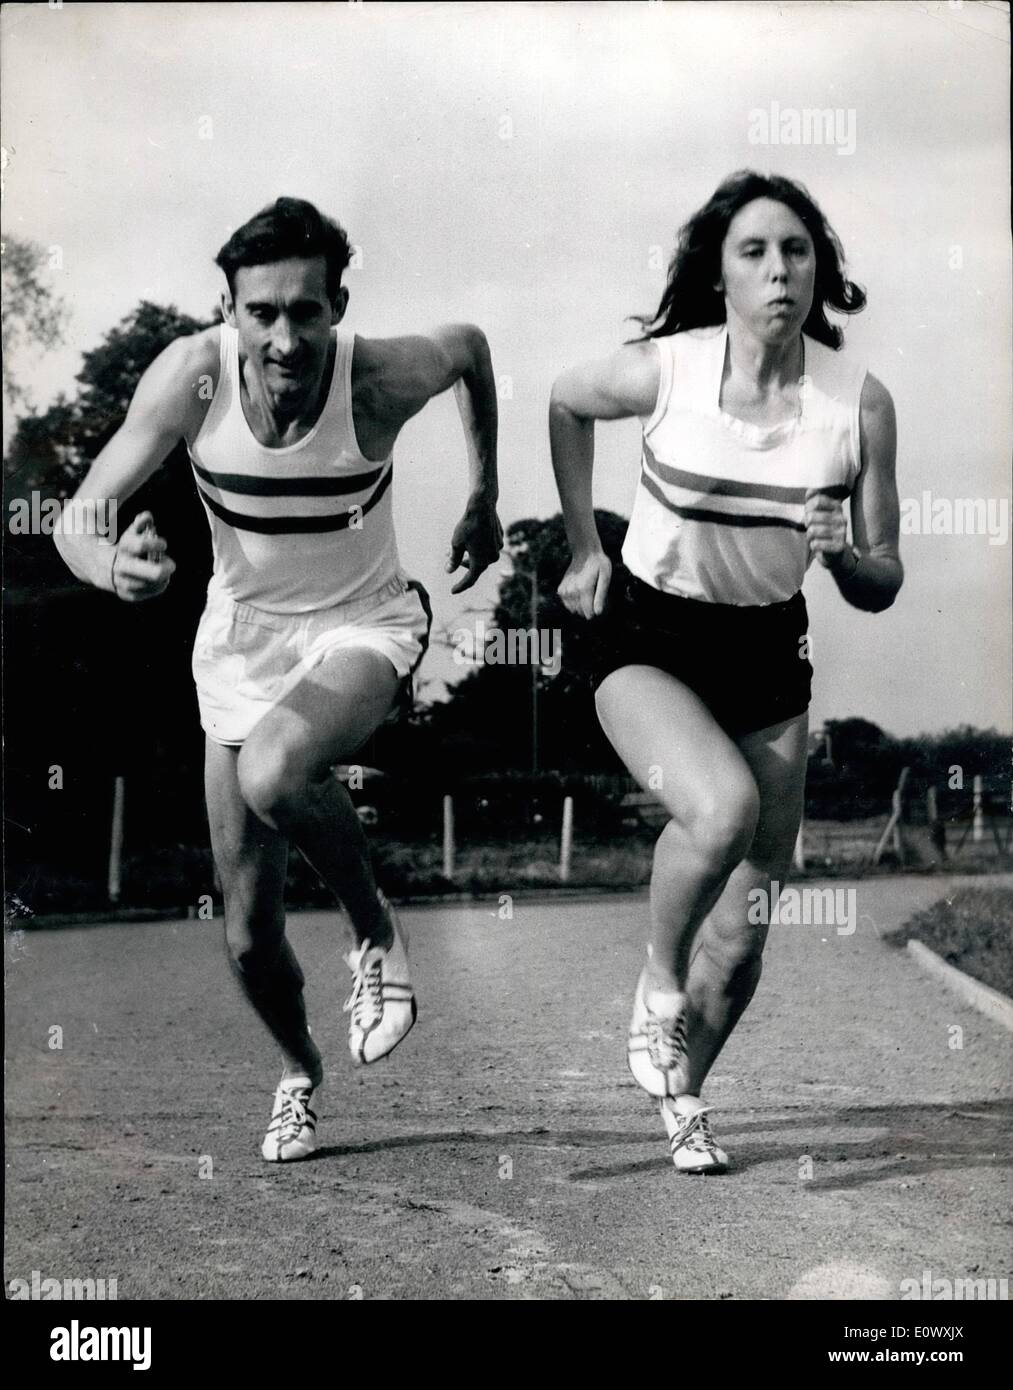 Aug. 08, 1964 - Anne Gets Ready for Tokyo. Entry in the 800 meters Event: Attractive twenty two year old sprinter Anne Smith daughter of a London newspaper linotype operator and who teaches at Convent of the Sacred Heart in Hammersmith - is now in training for her visit to Tokyo as a member in the 800 Matres event says she owes her success to the one ad only Gordon Pirie - former world record holder who trained her. Gordon spends a lot of his time - coaching Anne of the Pirie home at Redhill Stock Photo